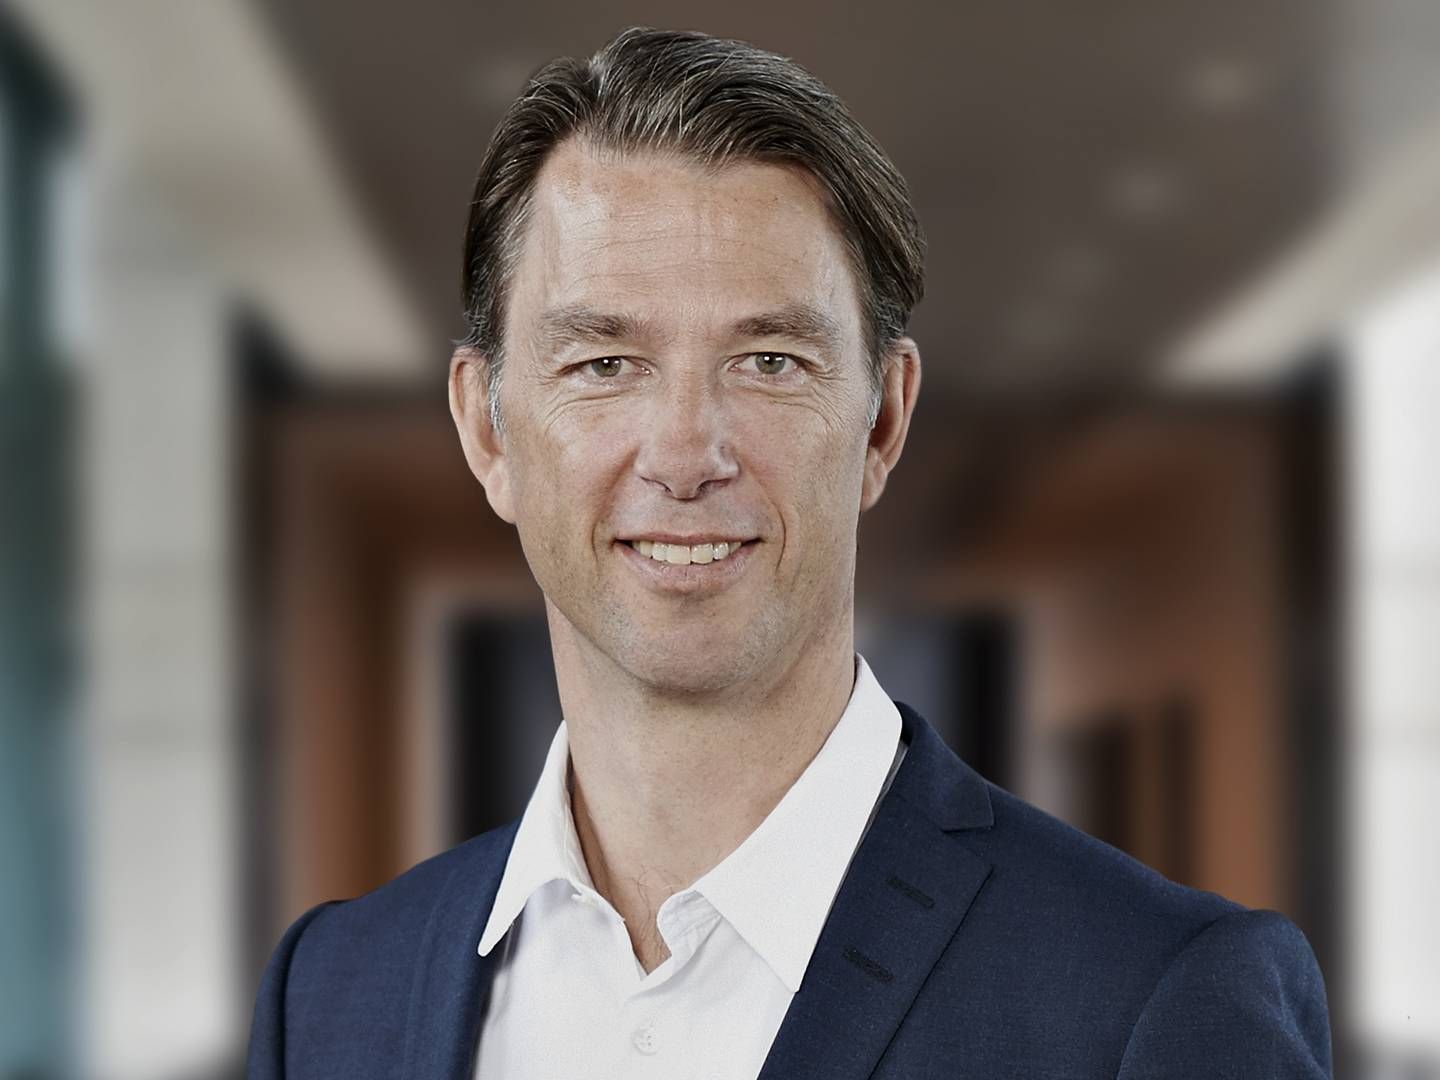 Eric Pedersen has been vocal on sustainability issues for years in Danish media during his tenure as head of Nordea funds' Danish branch. | Photo: Nordea Pressefoto